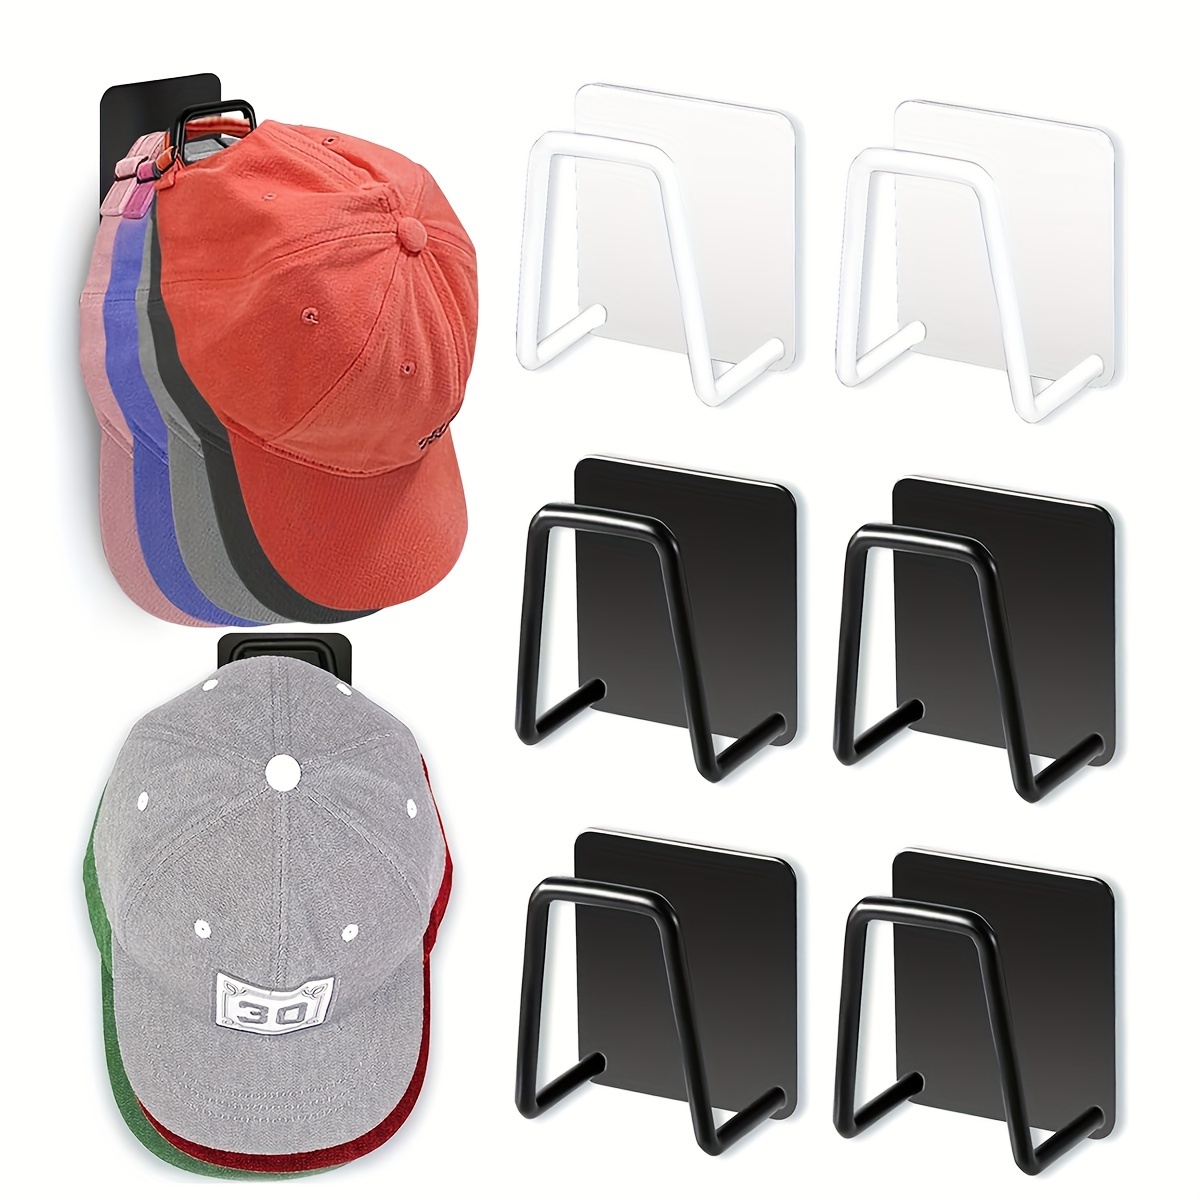 1pc Baseball Cap Storage organizer with clips, Eight Clips, Can Hold 16  Hats Hat Rack, Hat Storage Hook Rack